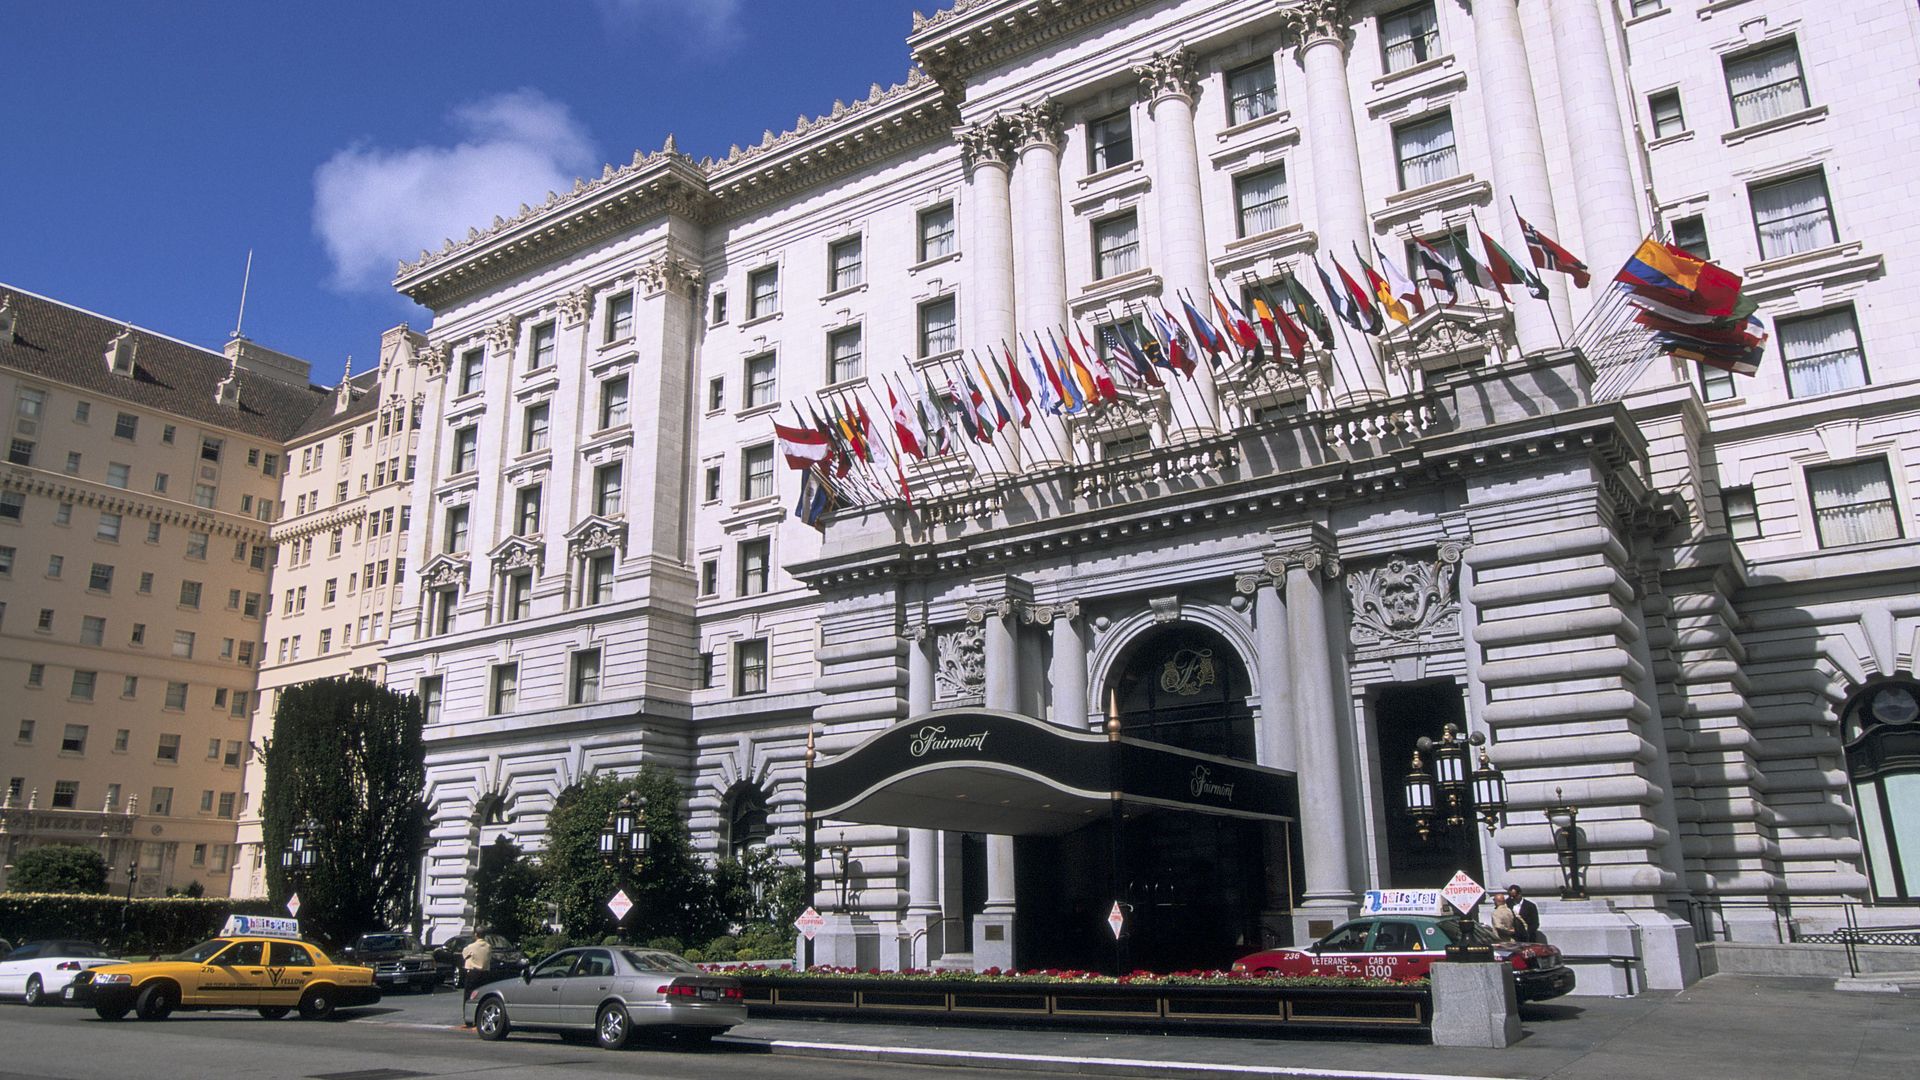 Photo of the entrance to Fairmont Hotel, with several international flags hanging from the balcony